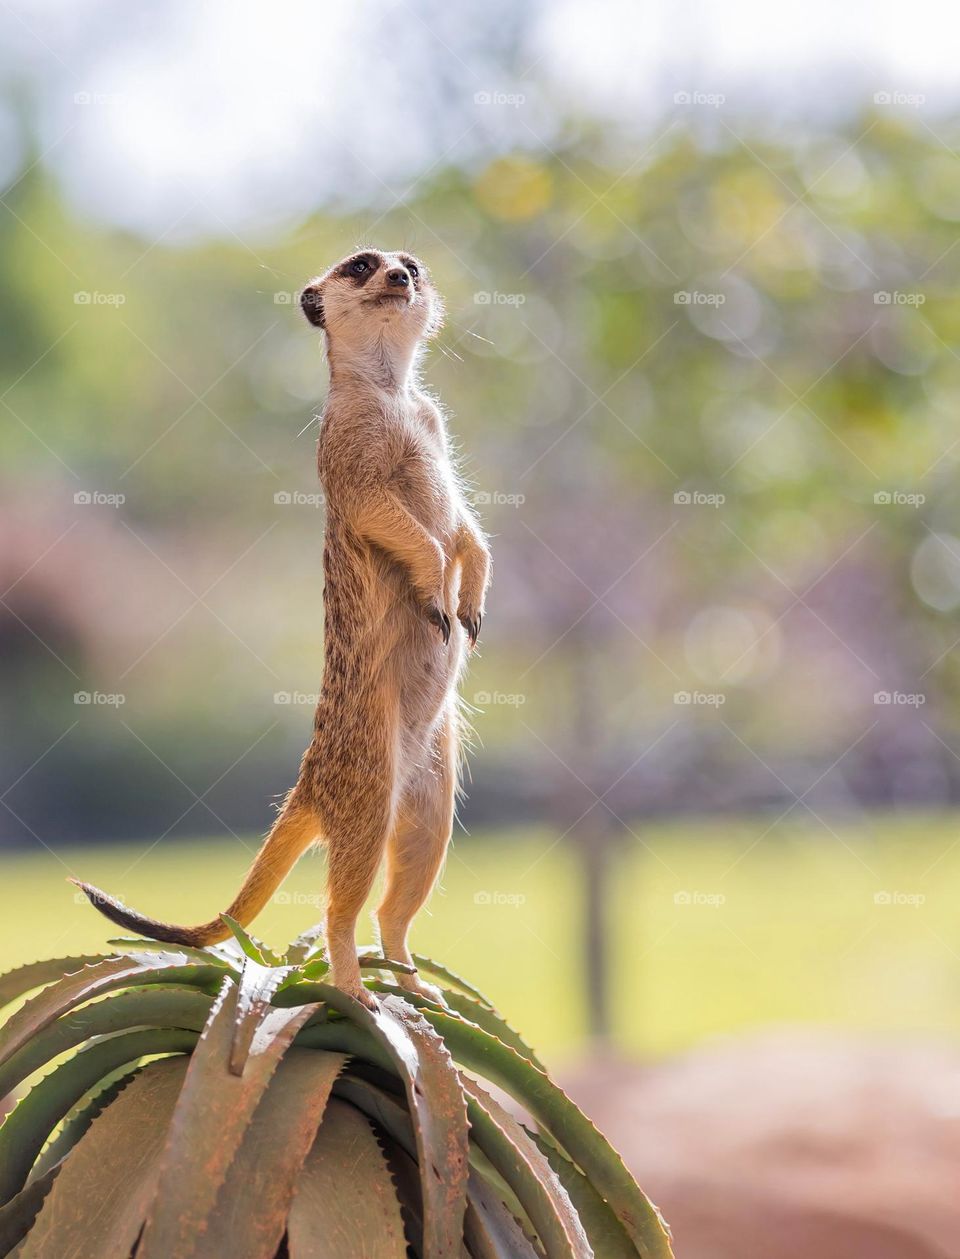 Meerkat at standing on a rock